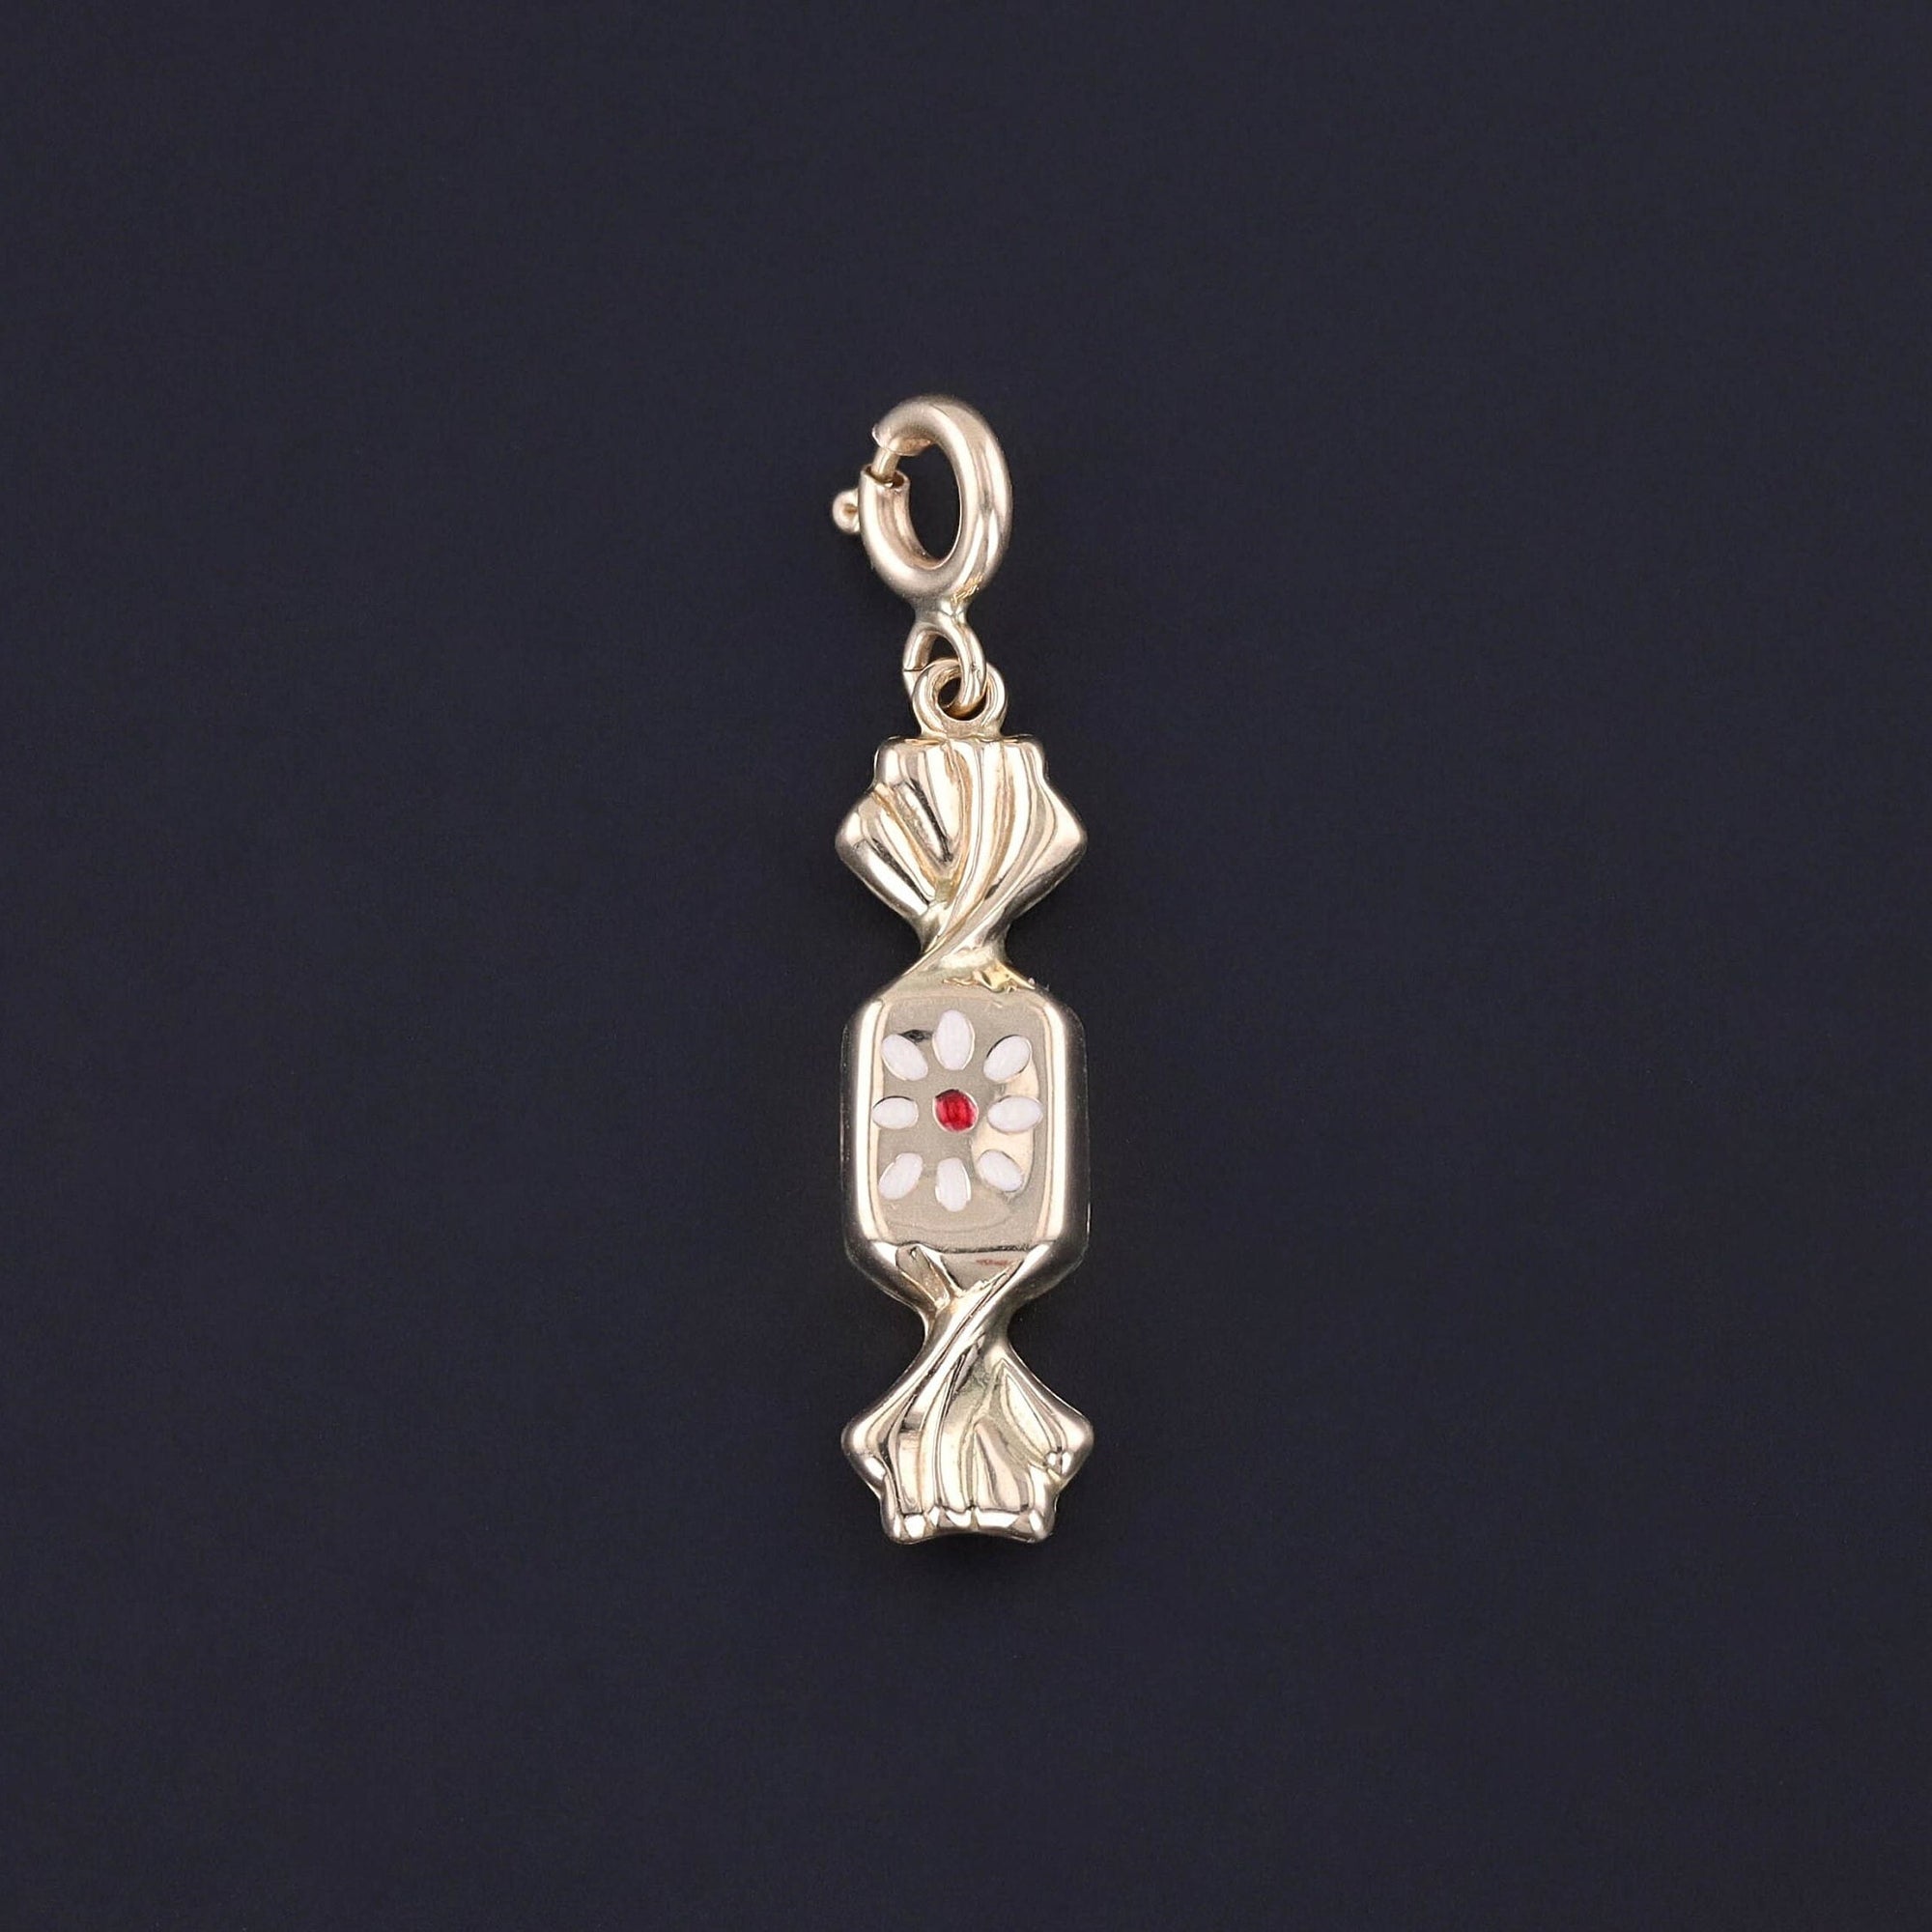 Vintage Candy Charm of 14k Gold